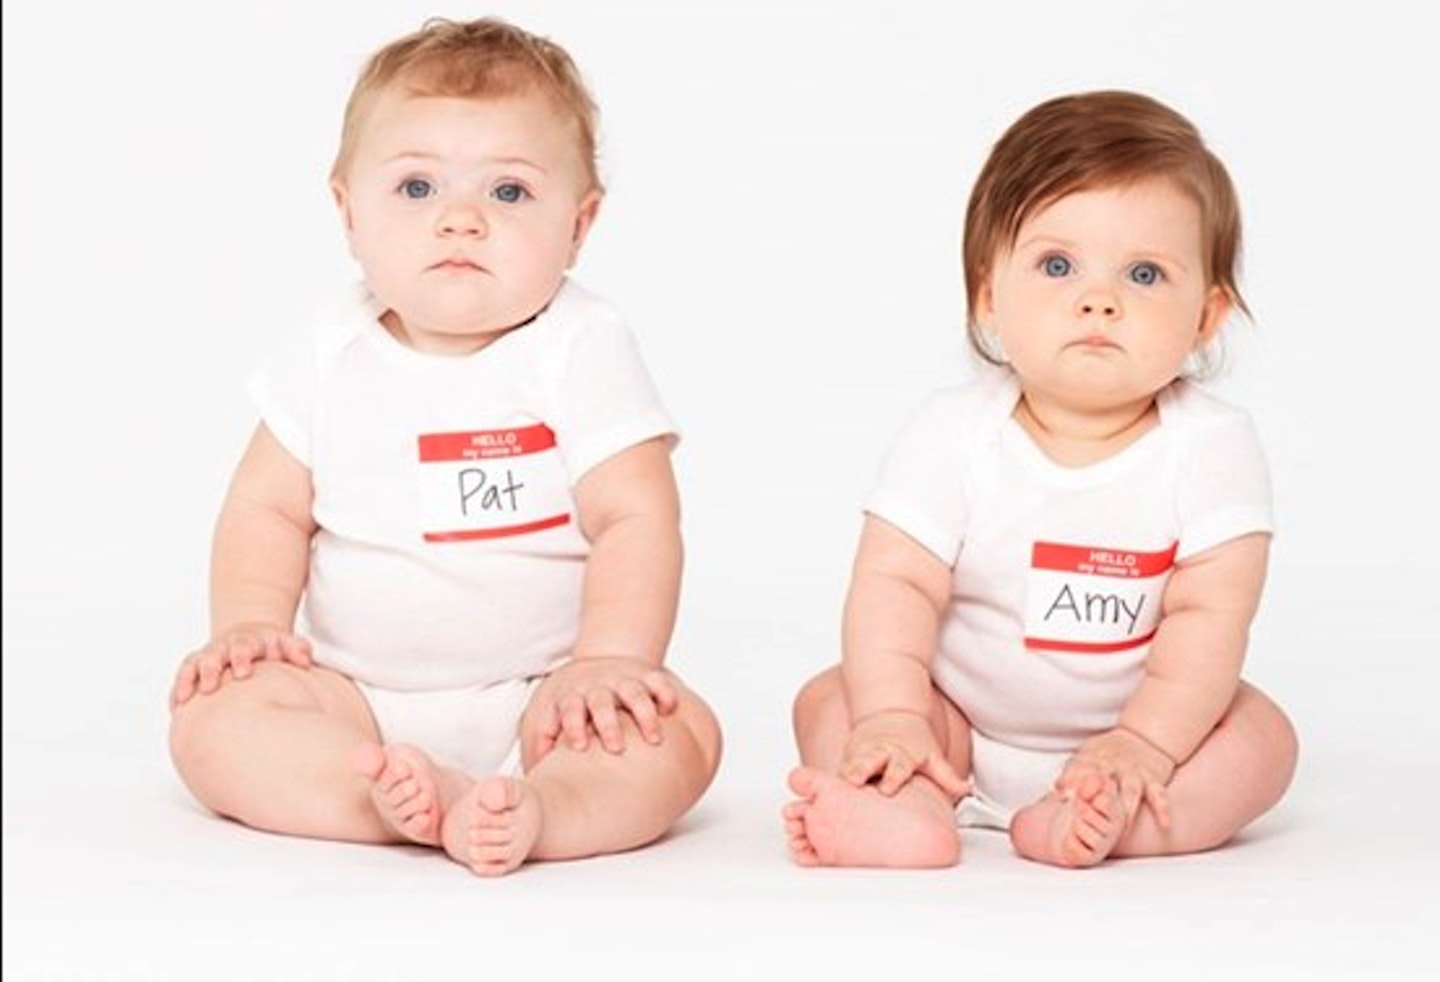 babies with name tags